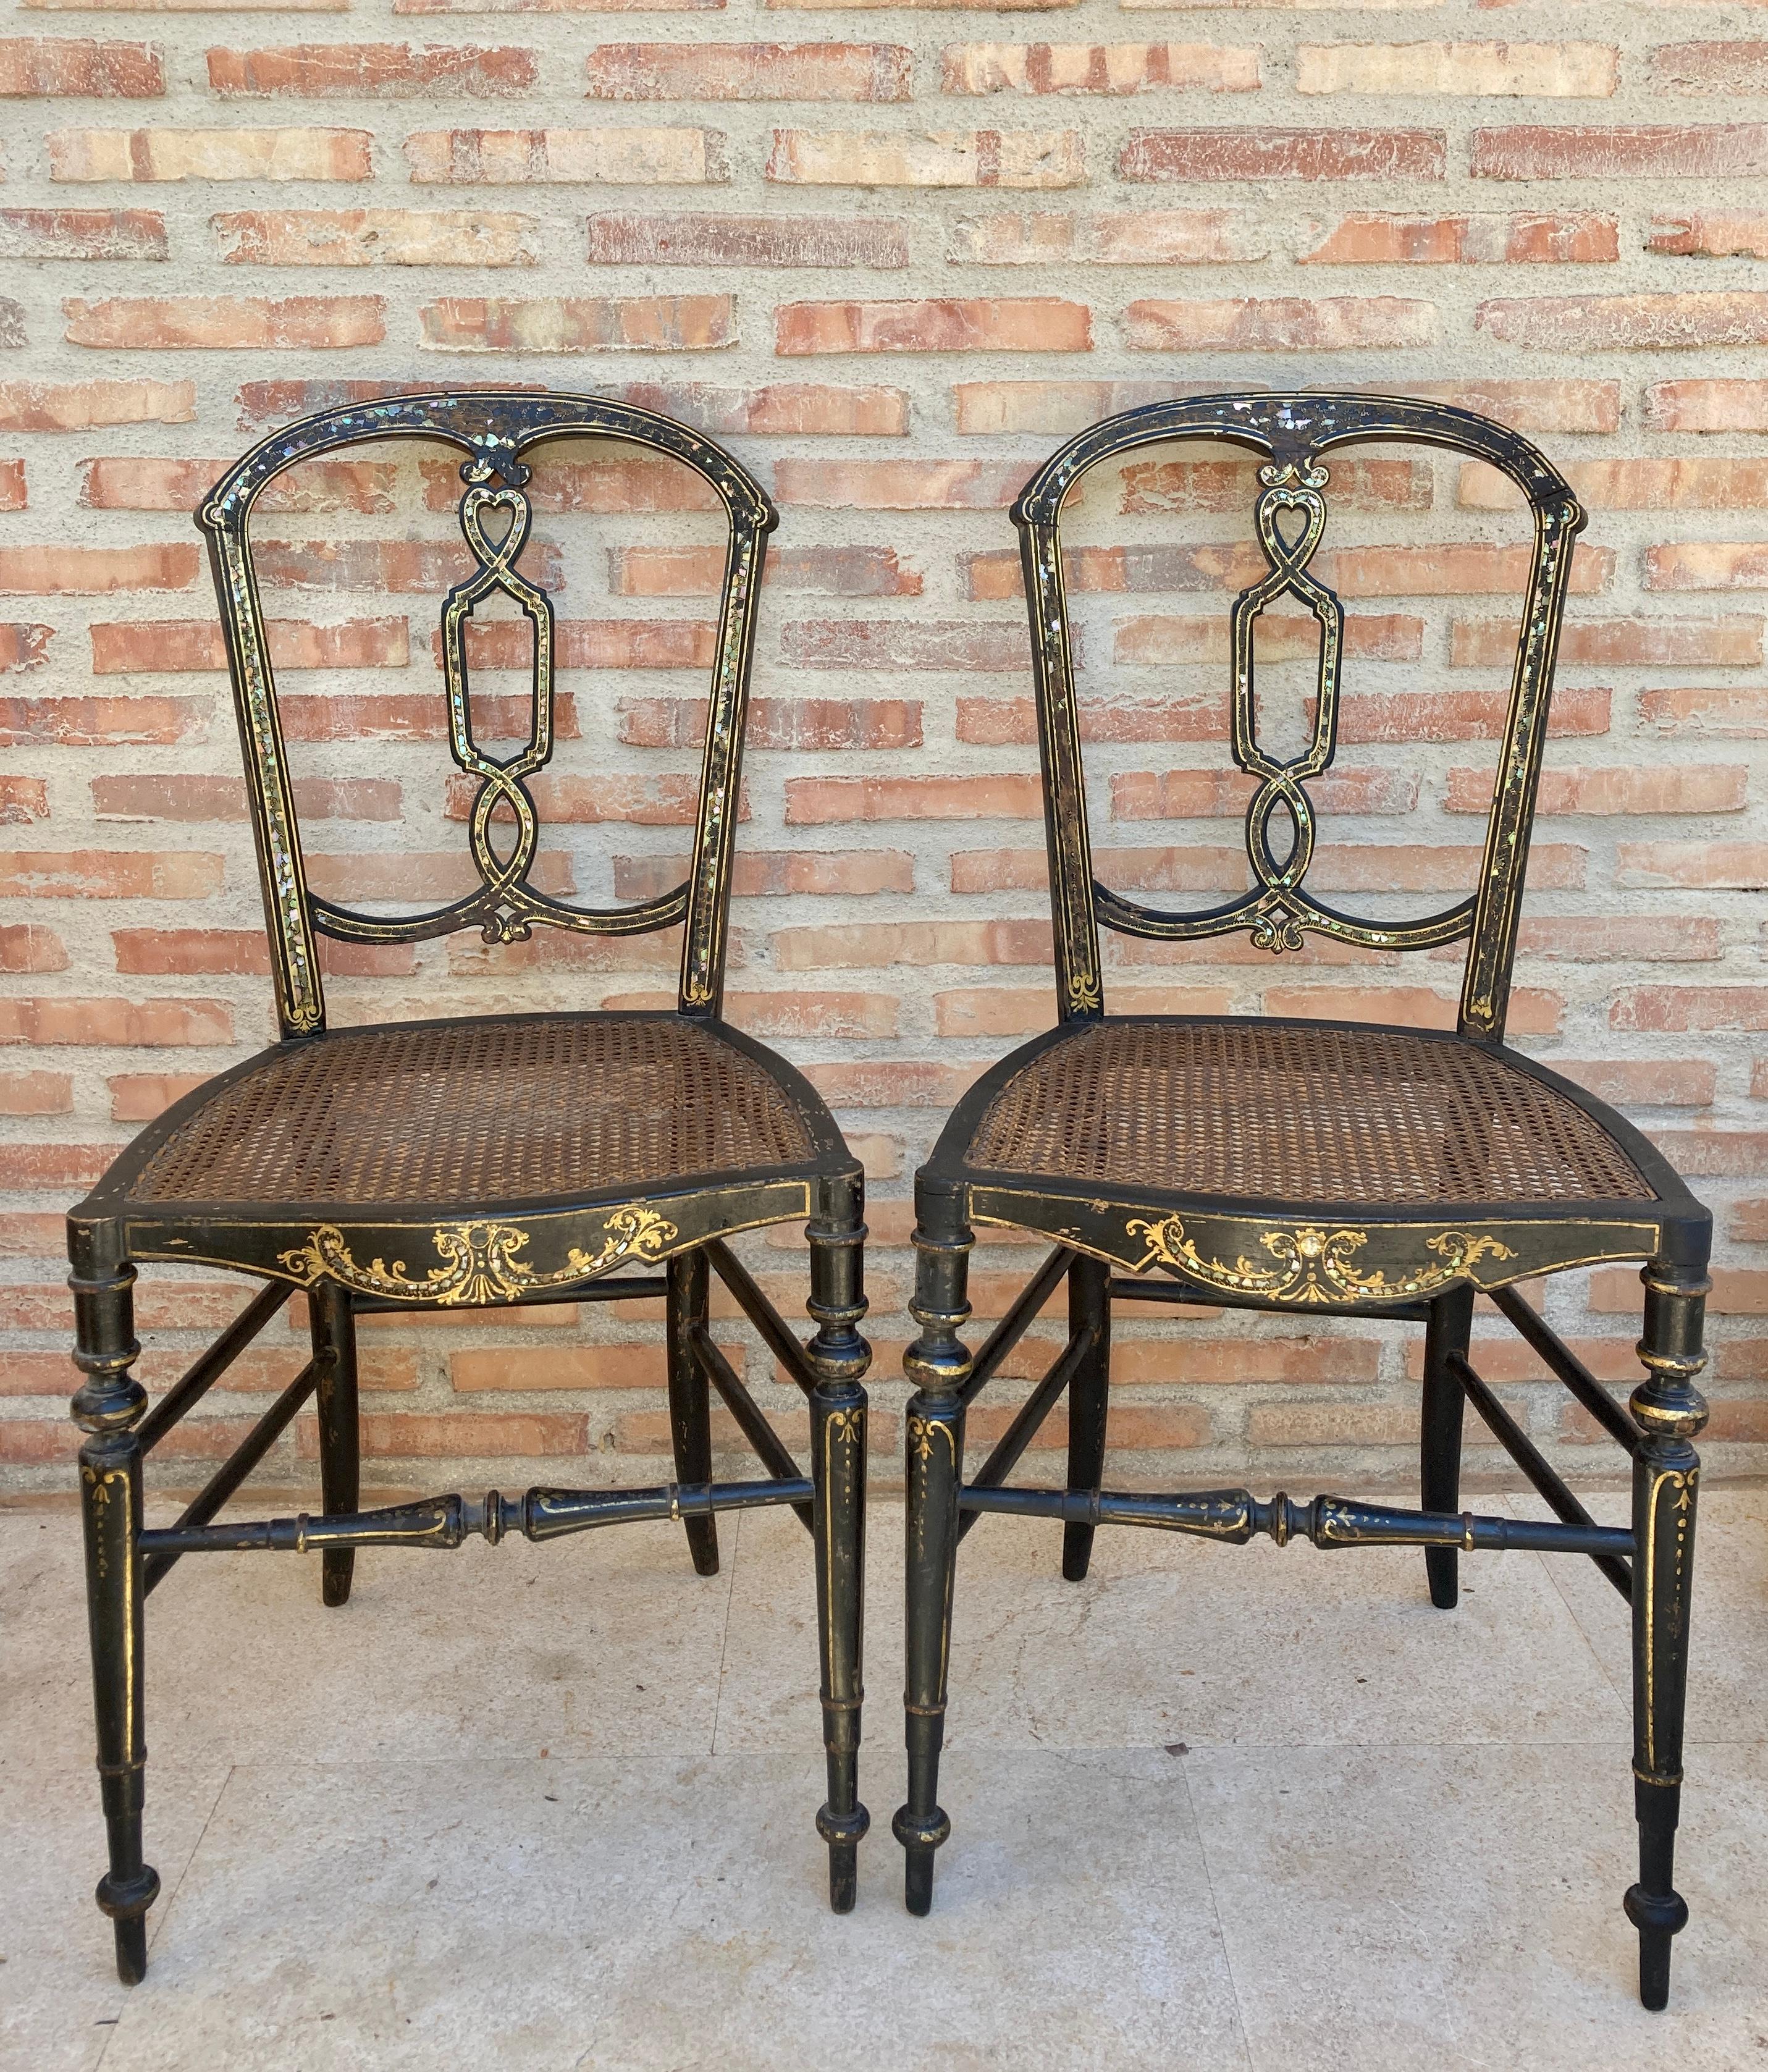 Elizabethan Wood Chairs Lacquered in Black and Decorated in Gold with Wicker Seat, Set of 2

A pair of charming Elizabethan chairs (1830-1904) made of beech wood.

It is lacquered in black and its decoration is worked by hand. They were decorated in